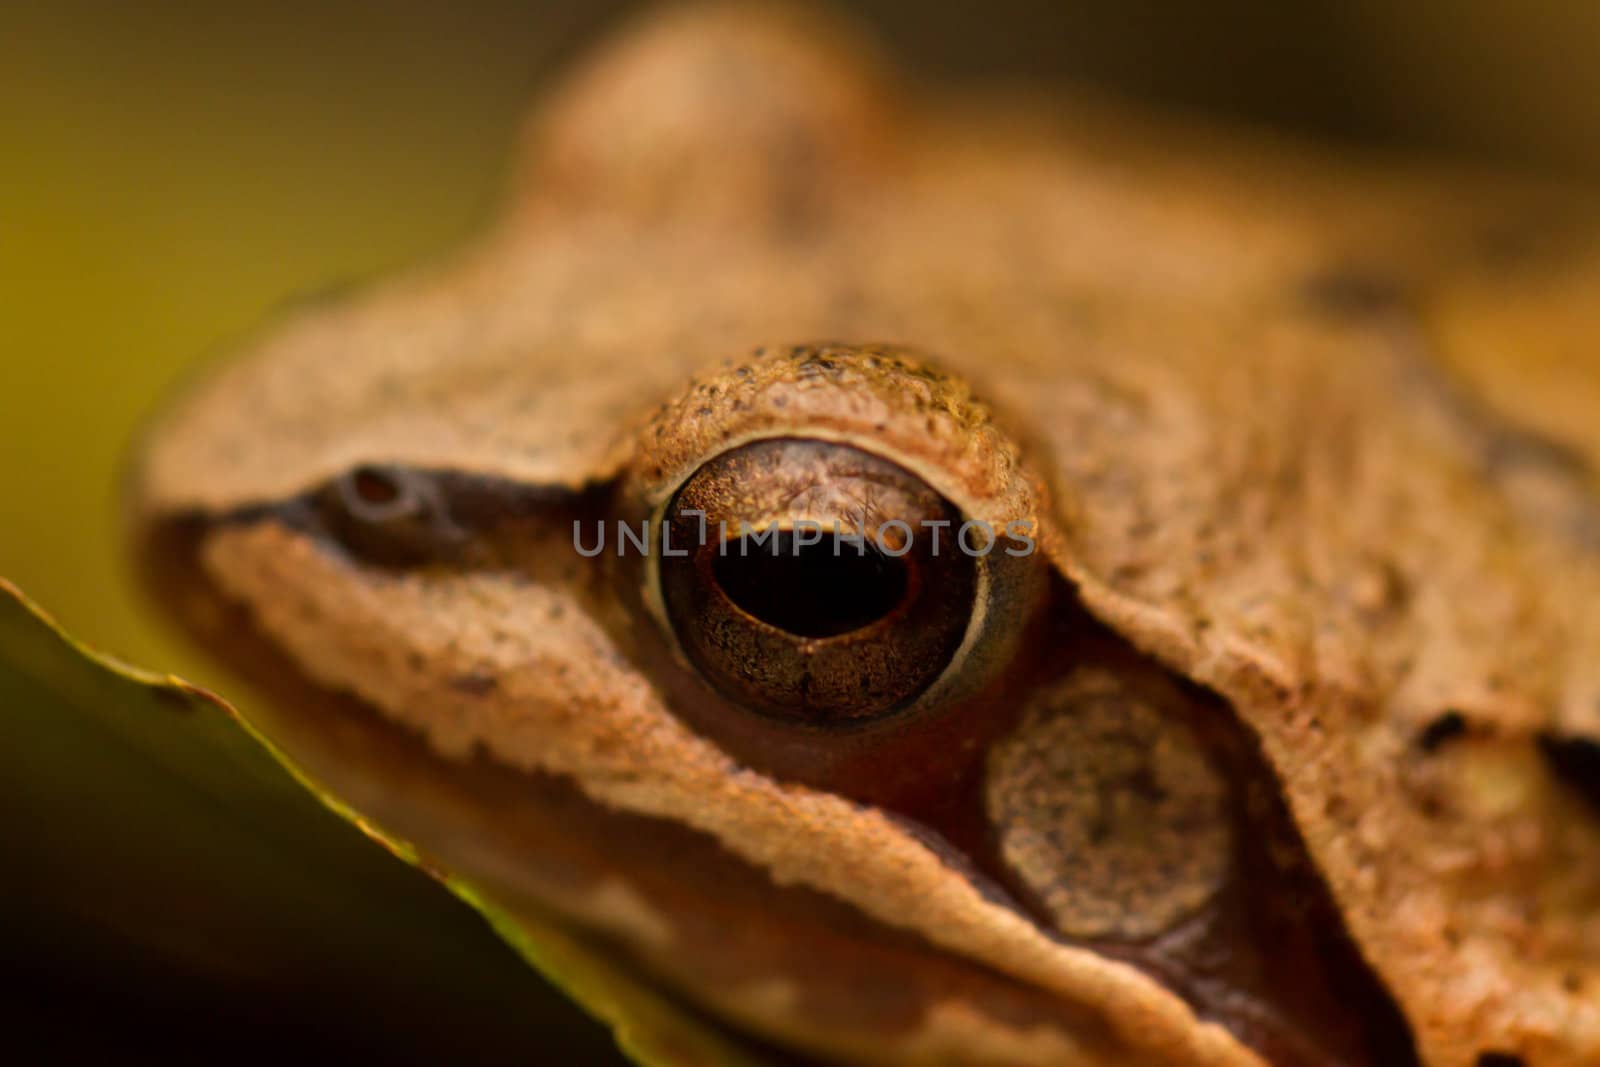 Close-up from a yellow frog's eye